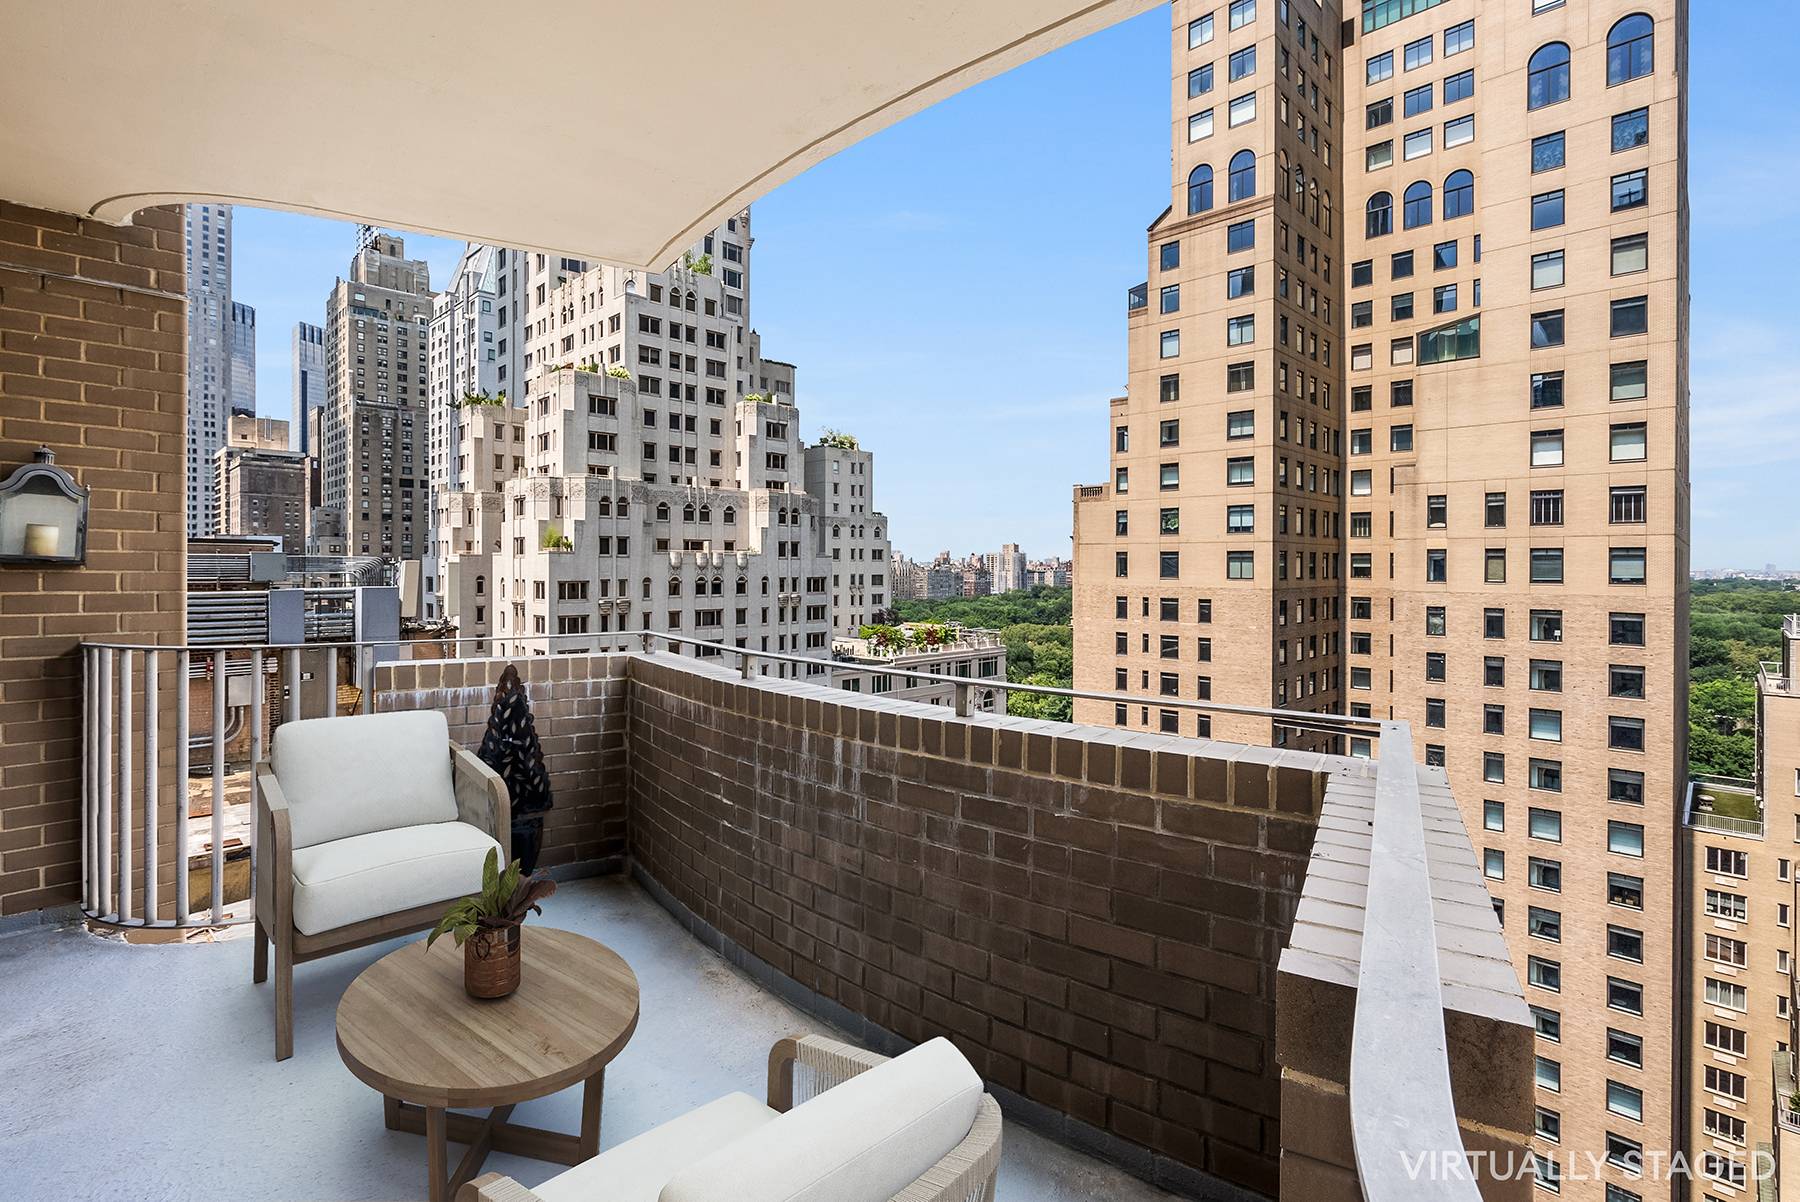 Perched high on the 22nd floor with open CIty and Central Park views, we welcome you to the glamour and elegance of apartment 22A at Tower 58.